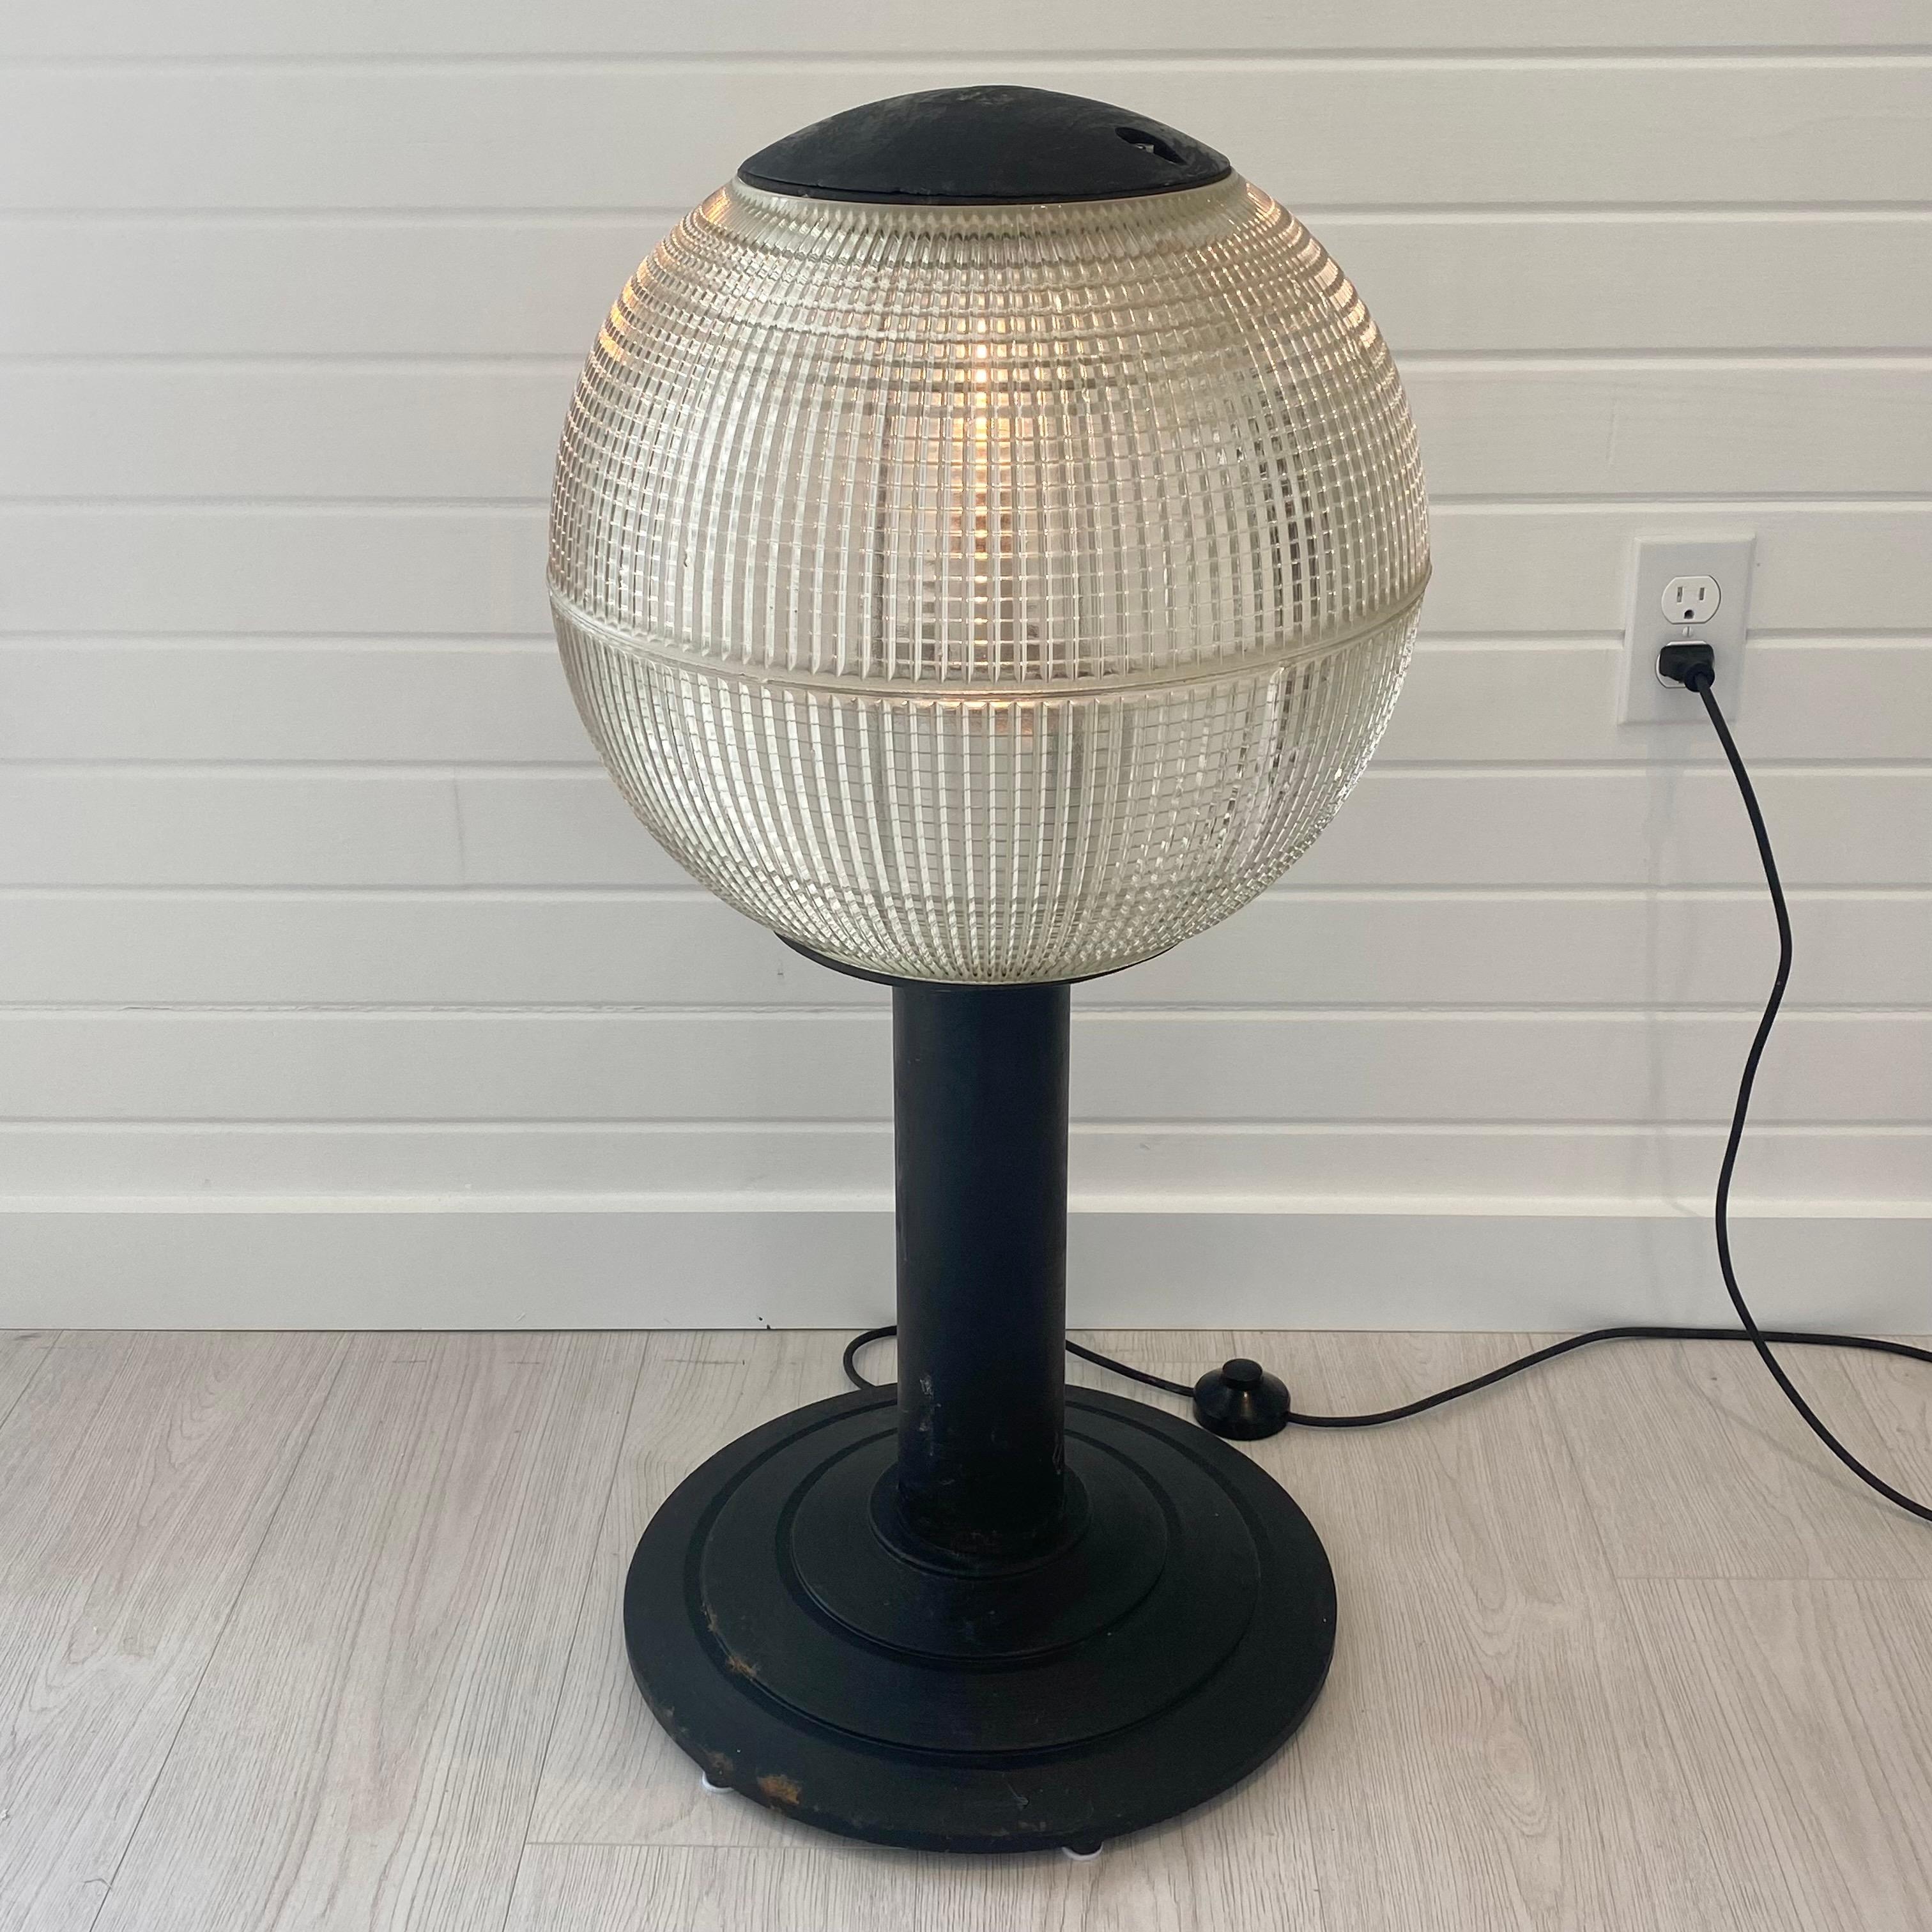 Unique original holophane globe street light from Paris which has been perfectly converted into a floor lamp. Black metal base sustains the globe. Glass illuminates beautifully through the art deco waffle glass. Fully rewired for the US with floor